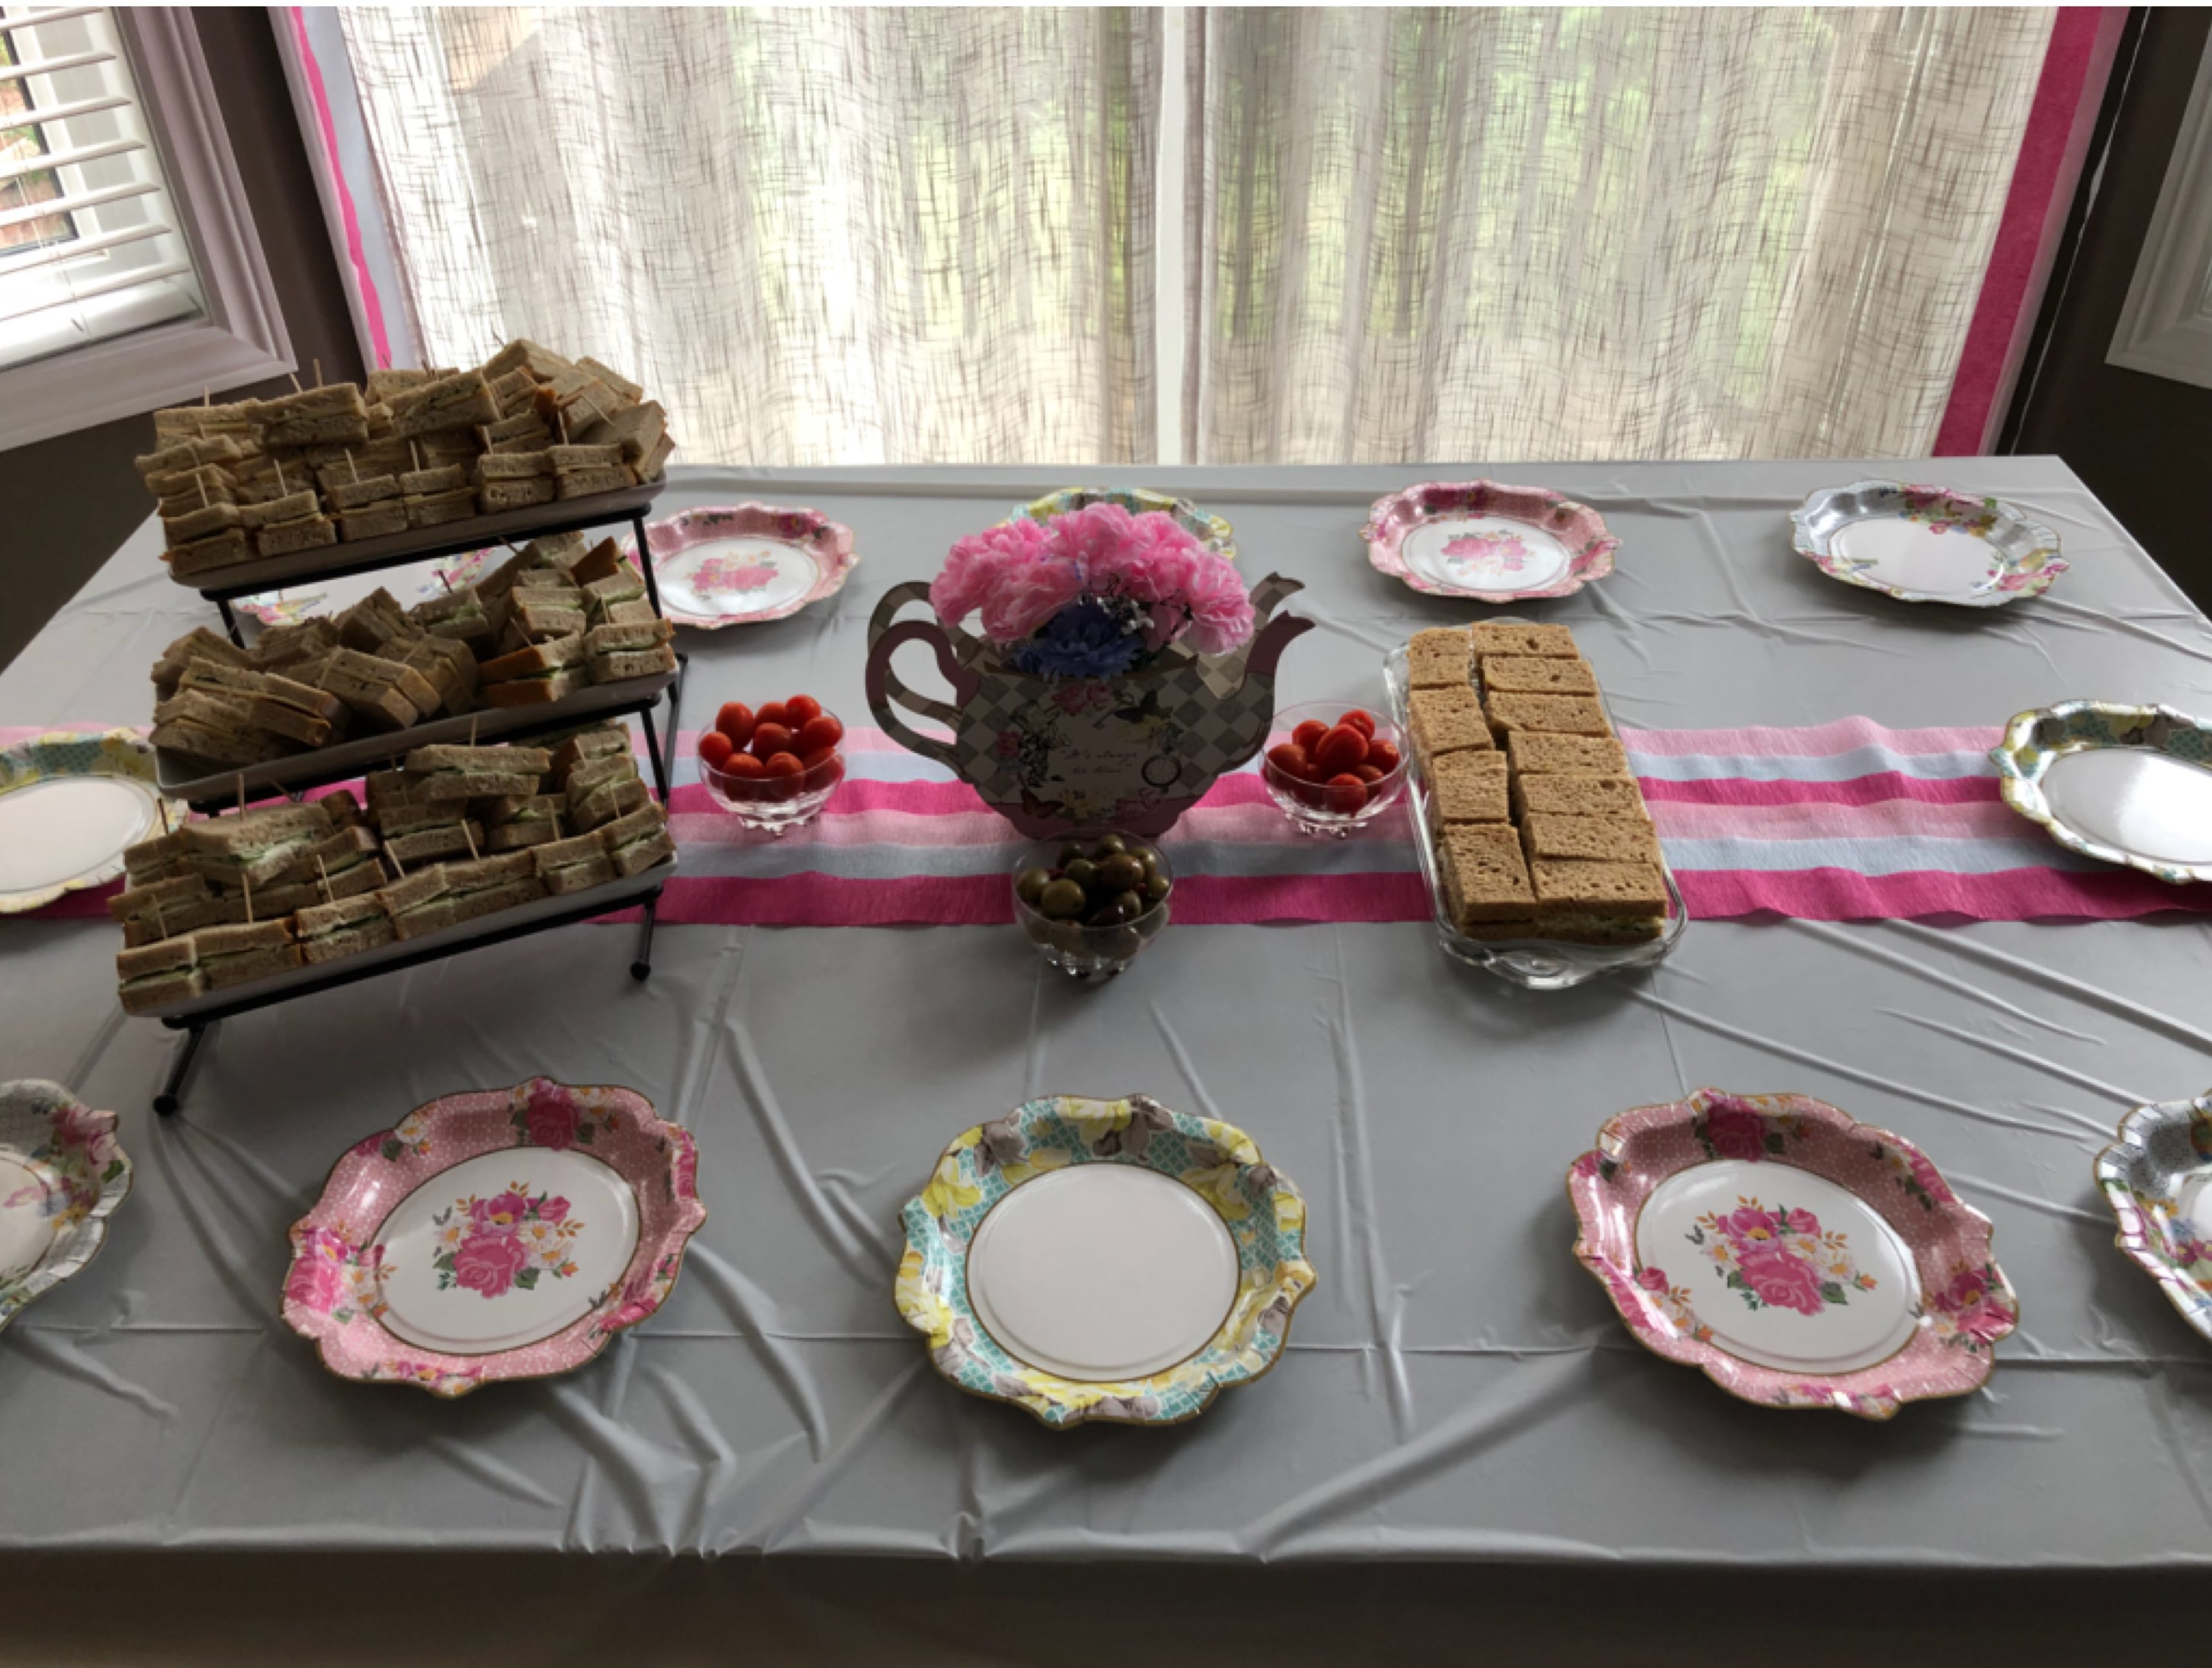 Adorable ideas for the perfect tea party birthday!